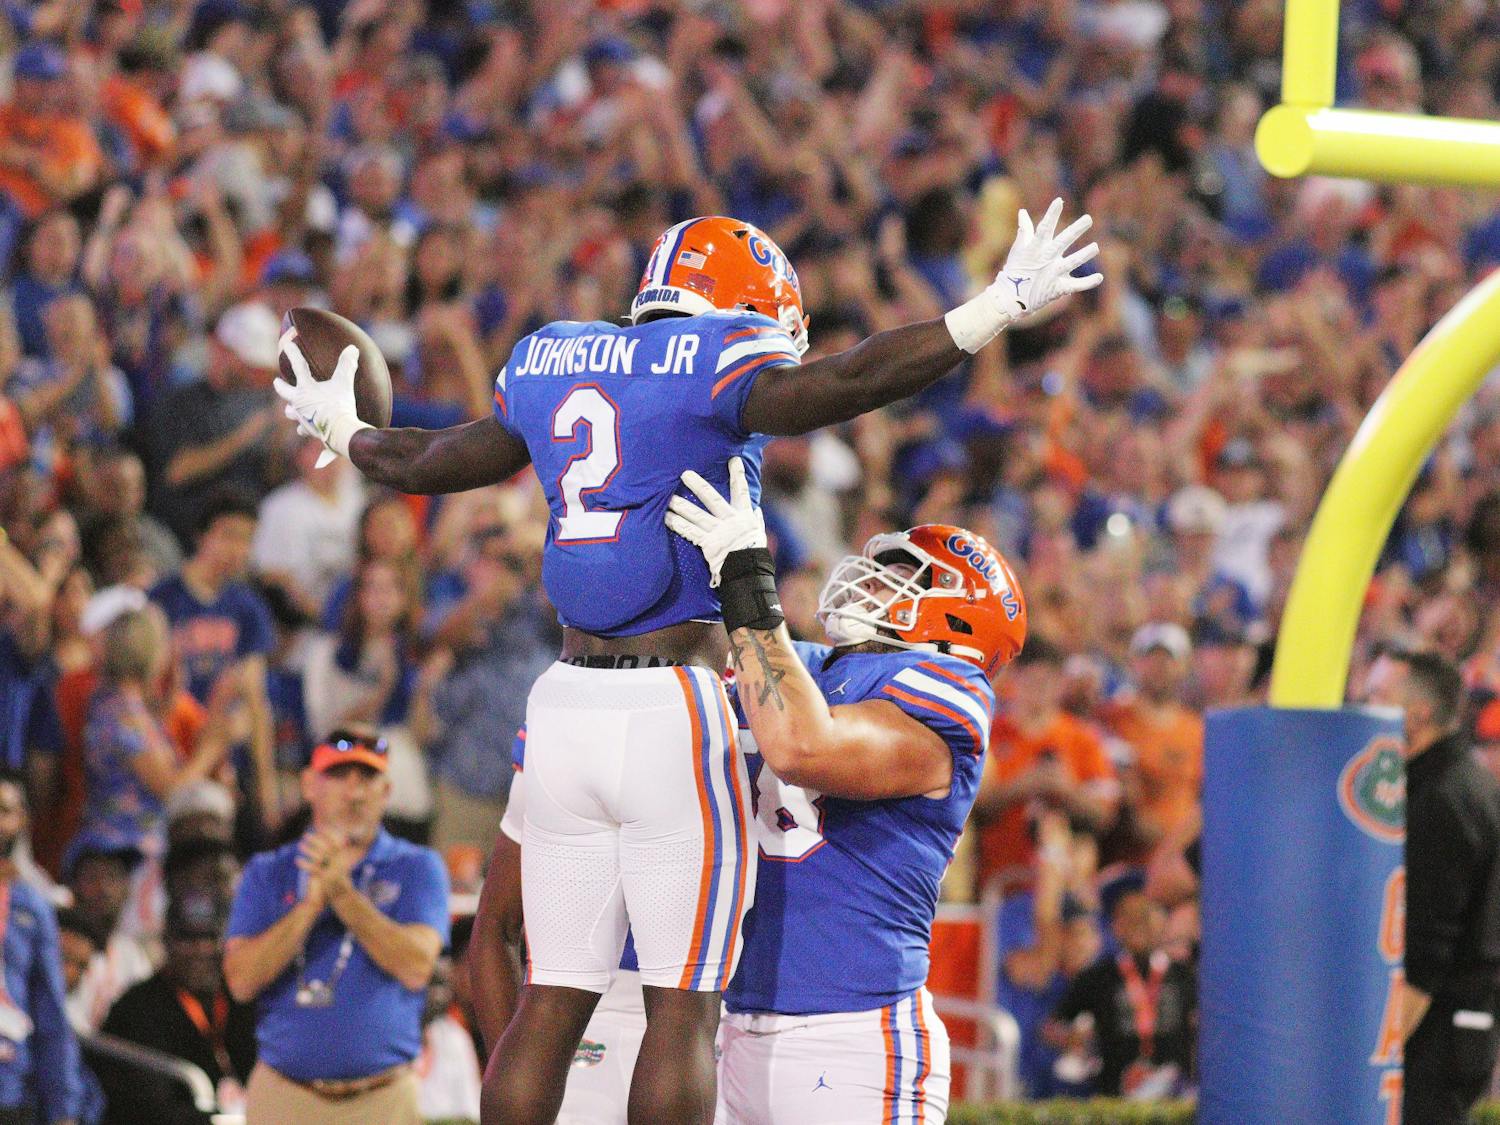 Running back Montrell Johnson Jr. is lifted up in celebration by offensive lineman Austin Barber after a Florida touchdown against LSU Saturday, Oct. 15, 2022. 